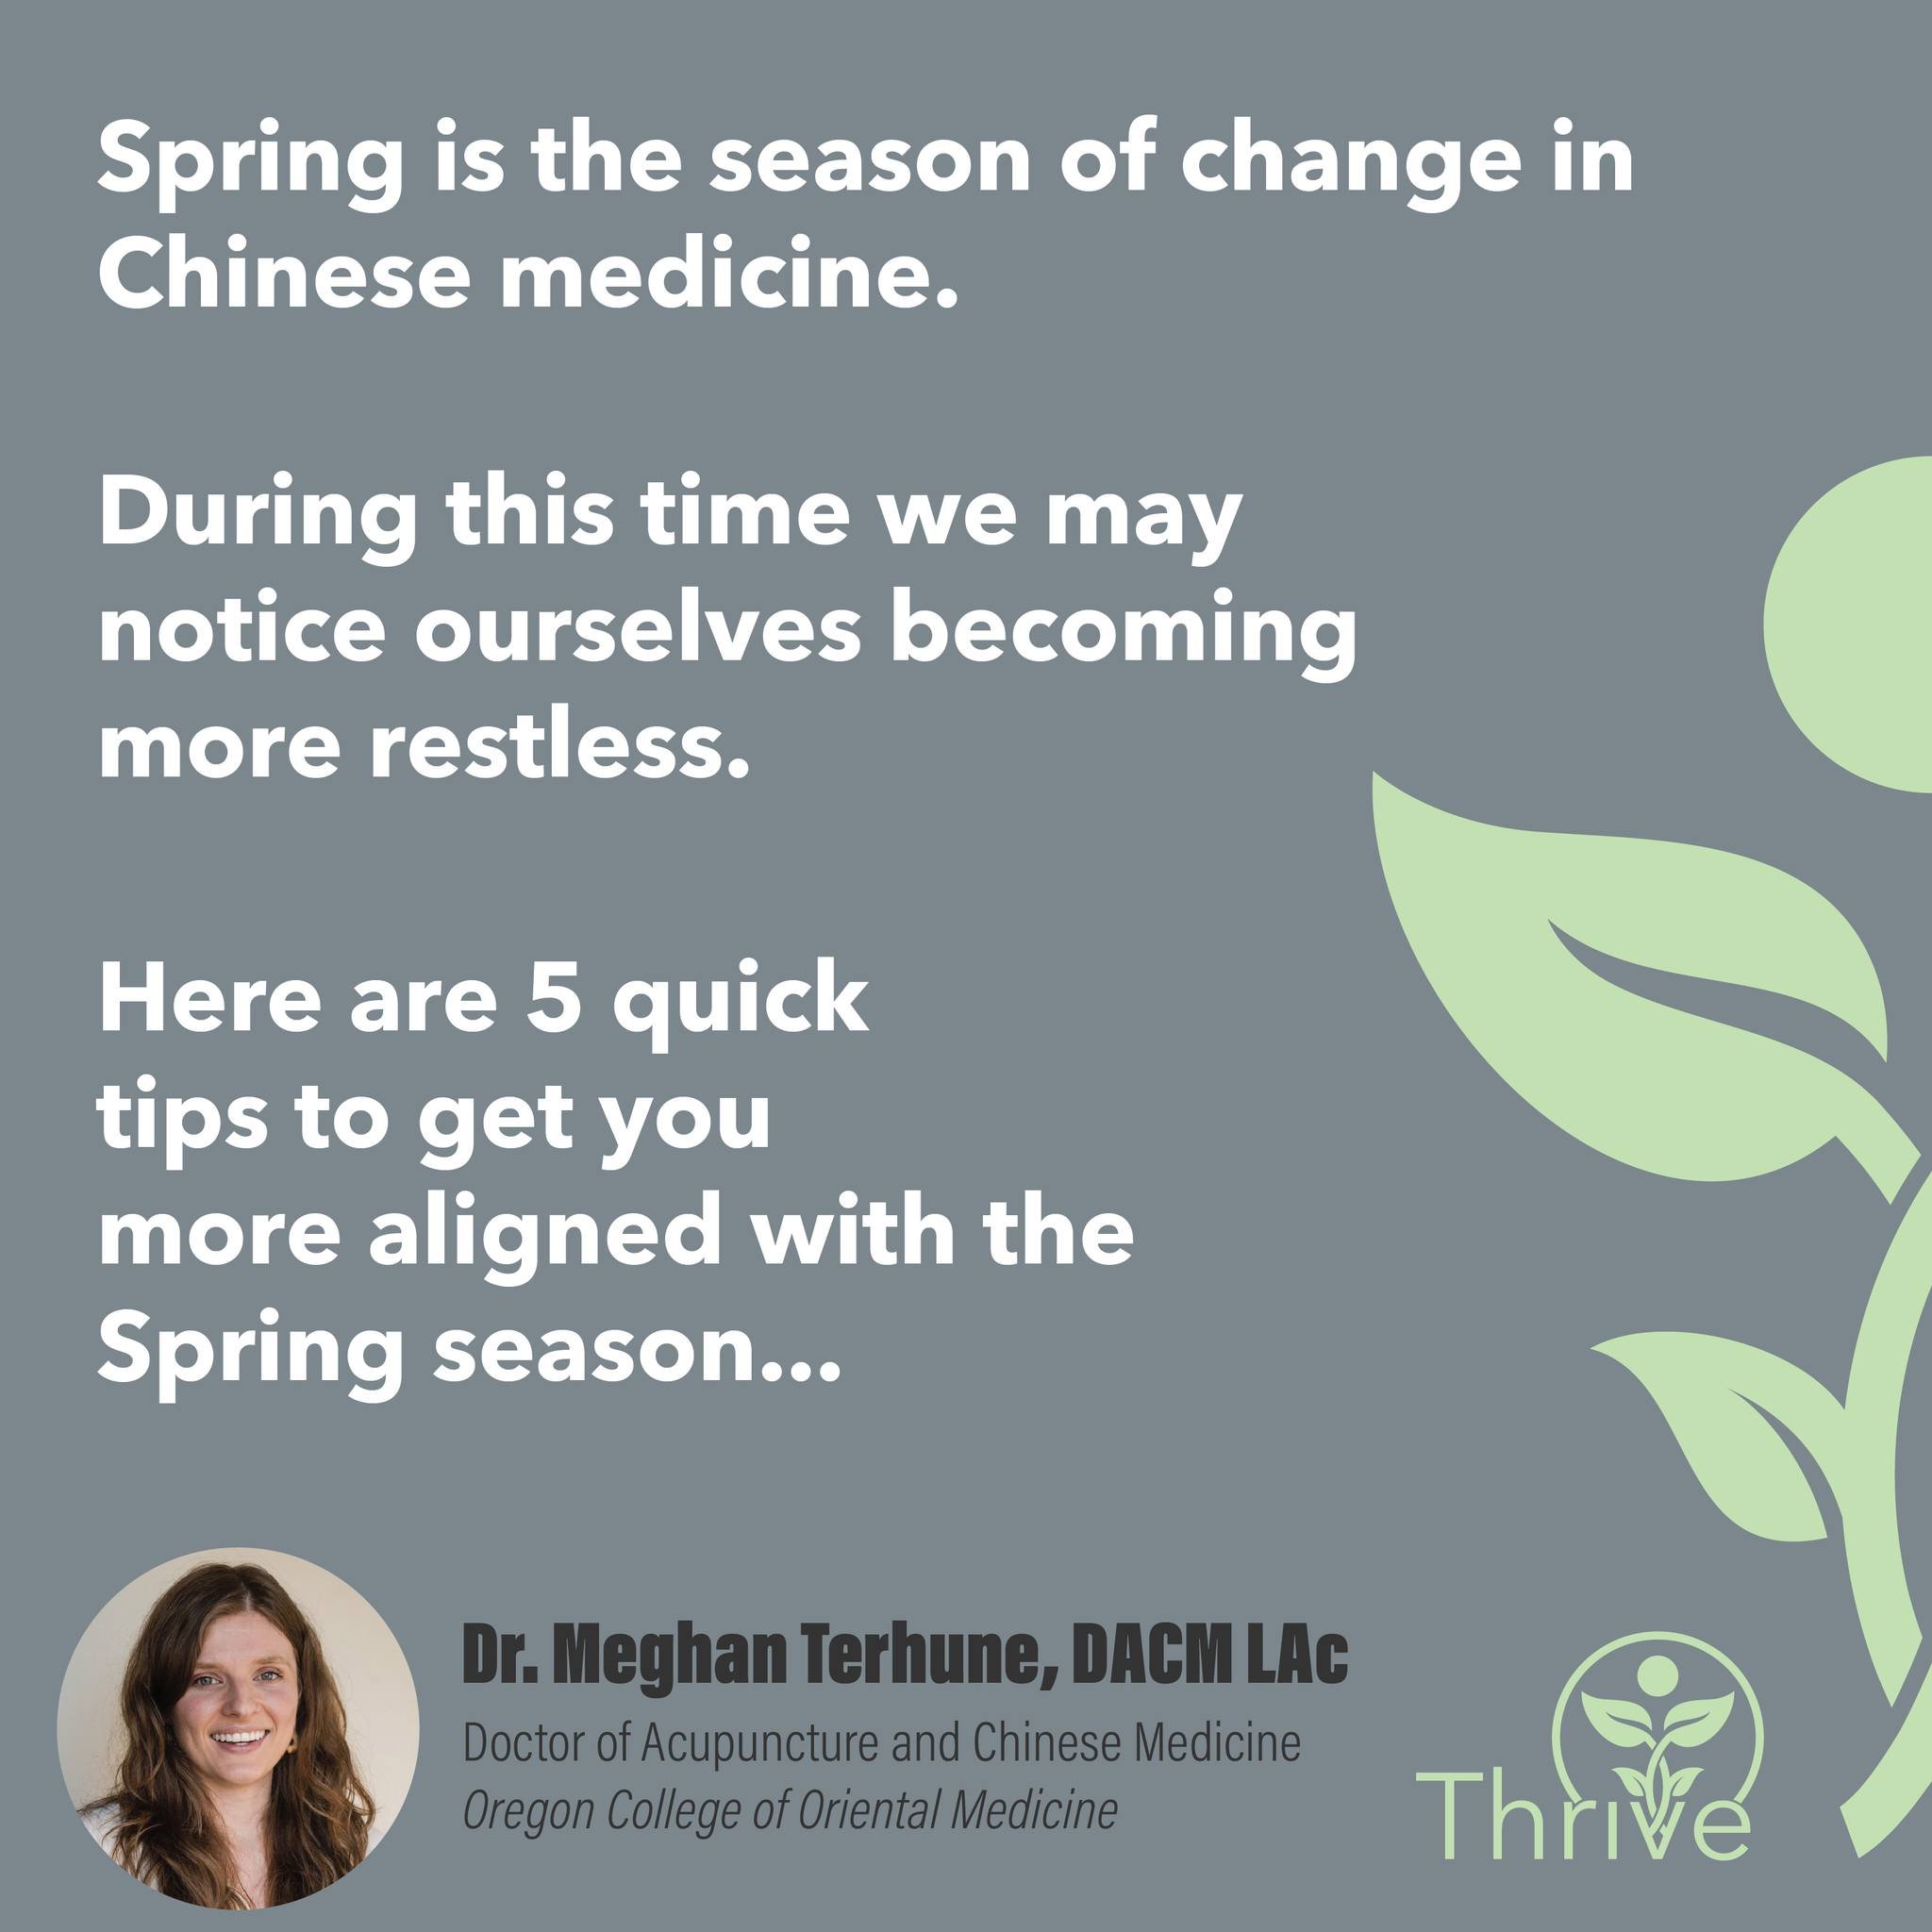 As the snow swiftly melts and green up approaches, we wanted to share some Chinese Medicine lifestyle information from our acupuncturist, Dr. Meghan Terhune.

Spring corresponds to the Wood Element and the Liver and Gall Bladder organs, and is the ti